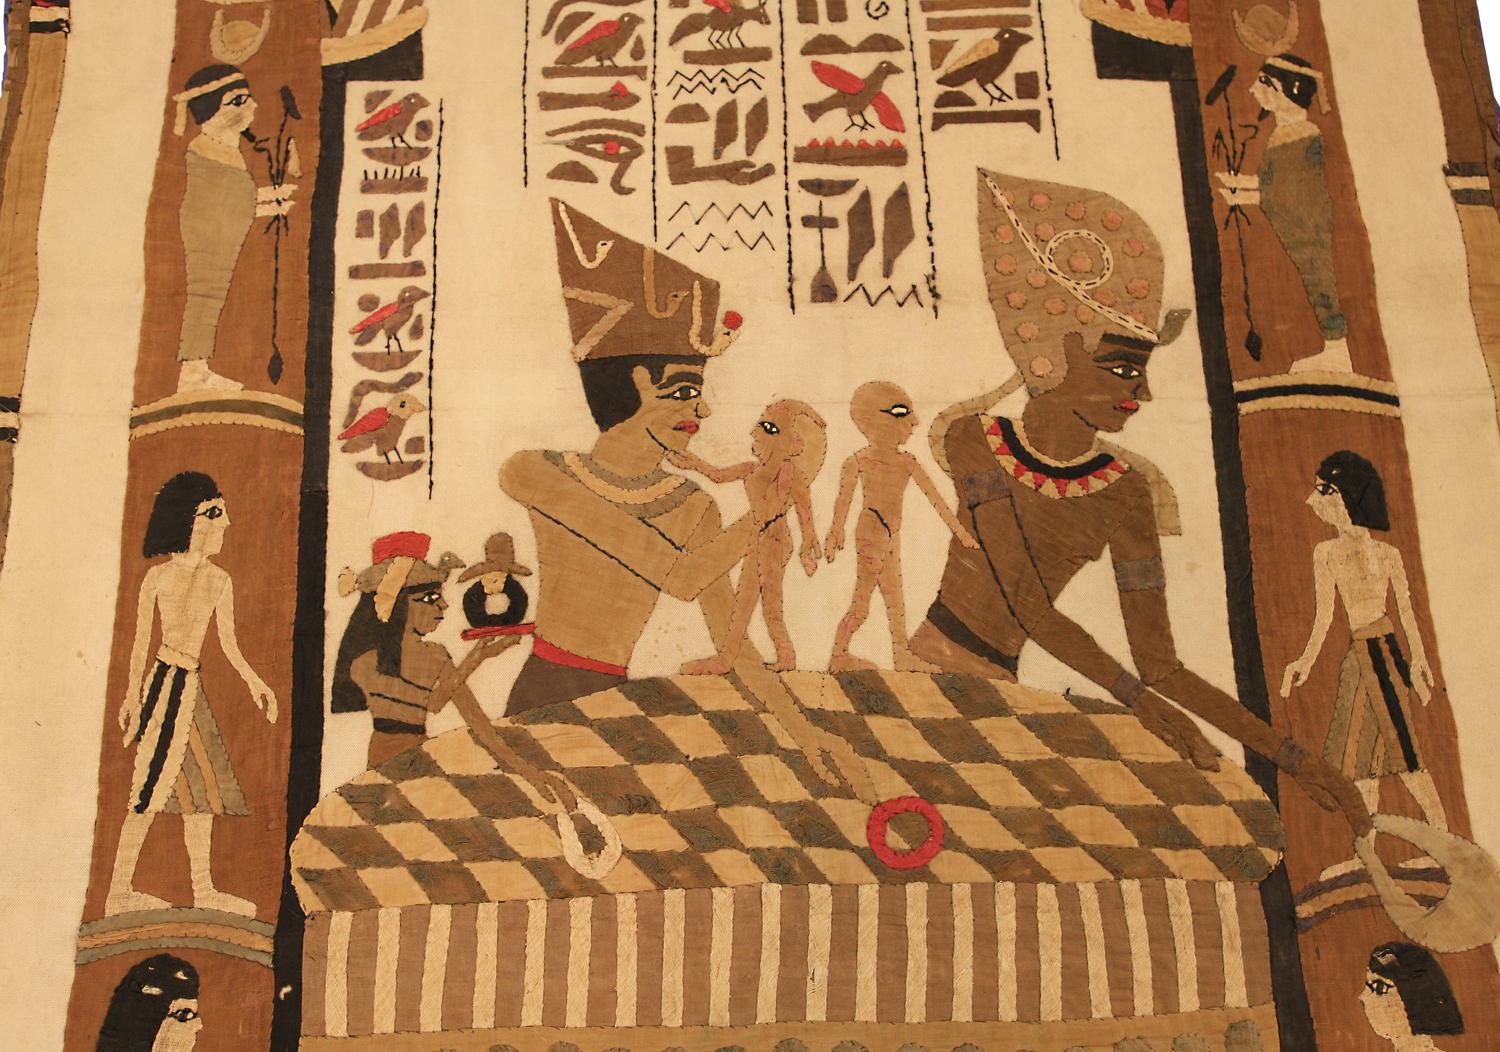 This is an antique Egyptian textile woven during the first quarter of the 20th century circa 1920s and measures 184 x 90cm in size. this textile depicts original drawings from ancient Egypt with many different figures, traditional motifs, and